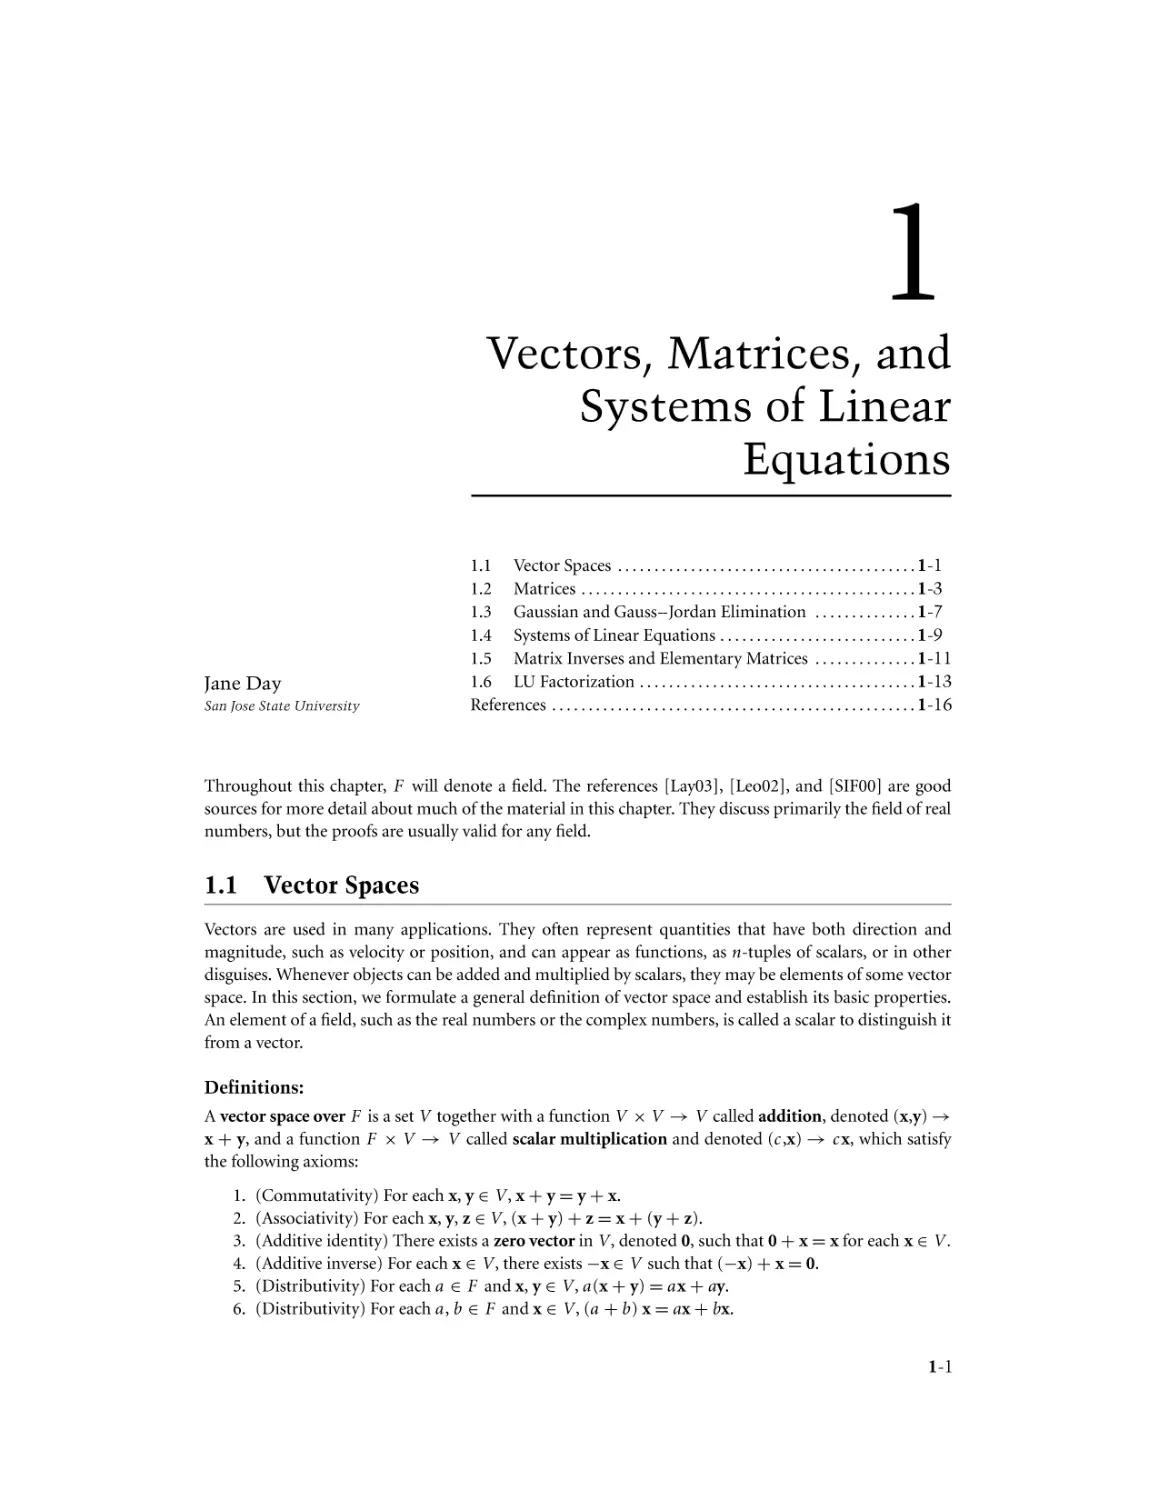 Chapter 1. Vectors, Matrices, and Systems of Linear Equations